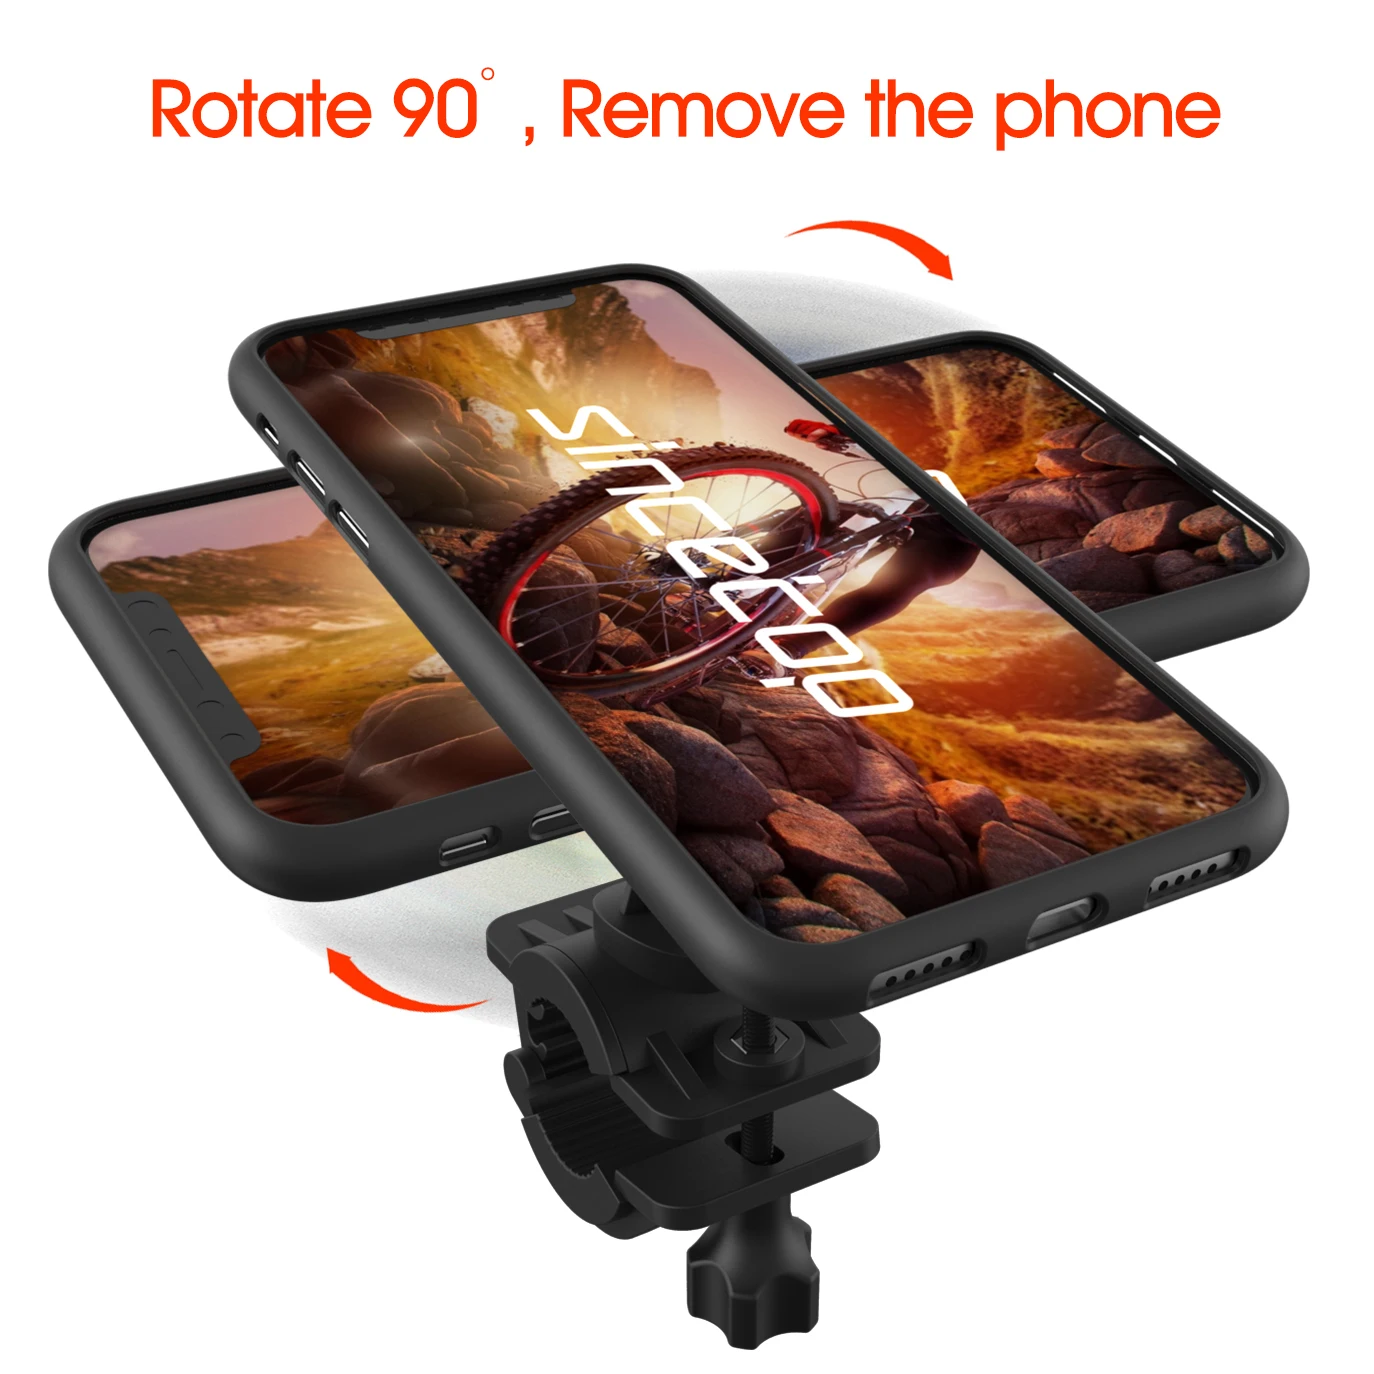 quick mount bicycle phone holder for iphone samsung universal mobile cell phone holder bike handlebar clip stand gps bracket free global shipping